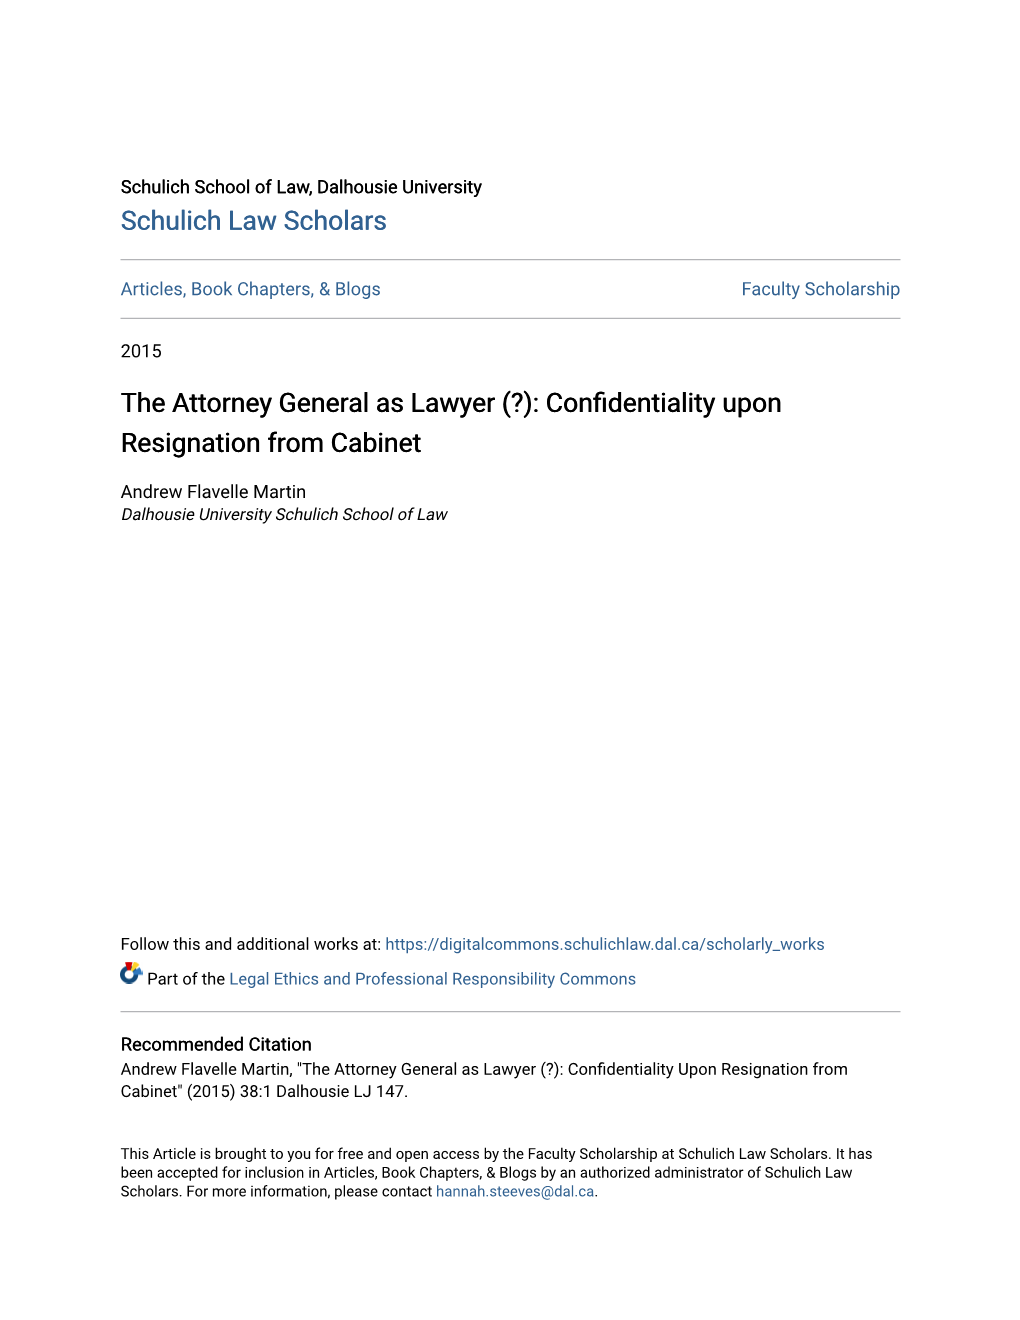 The Attorney General As Lawyer (?): Confidentiality Upon Resignation from Cabinet